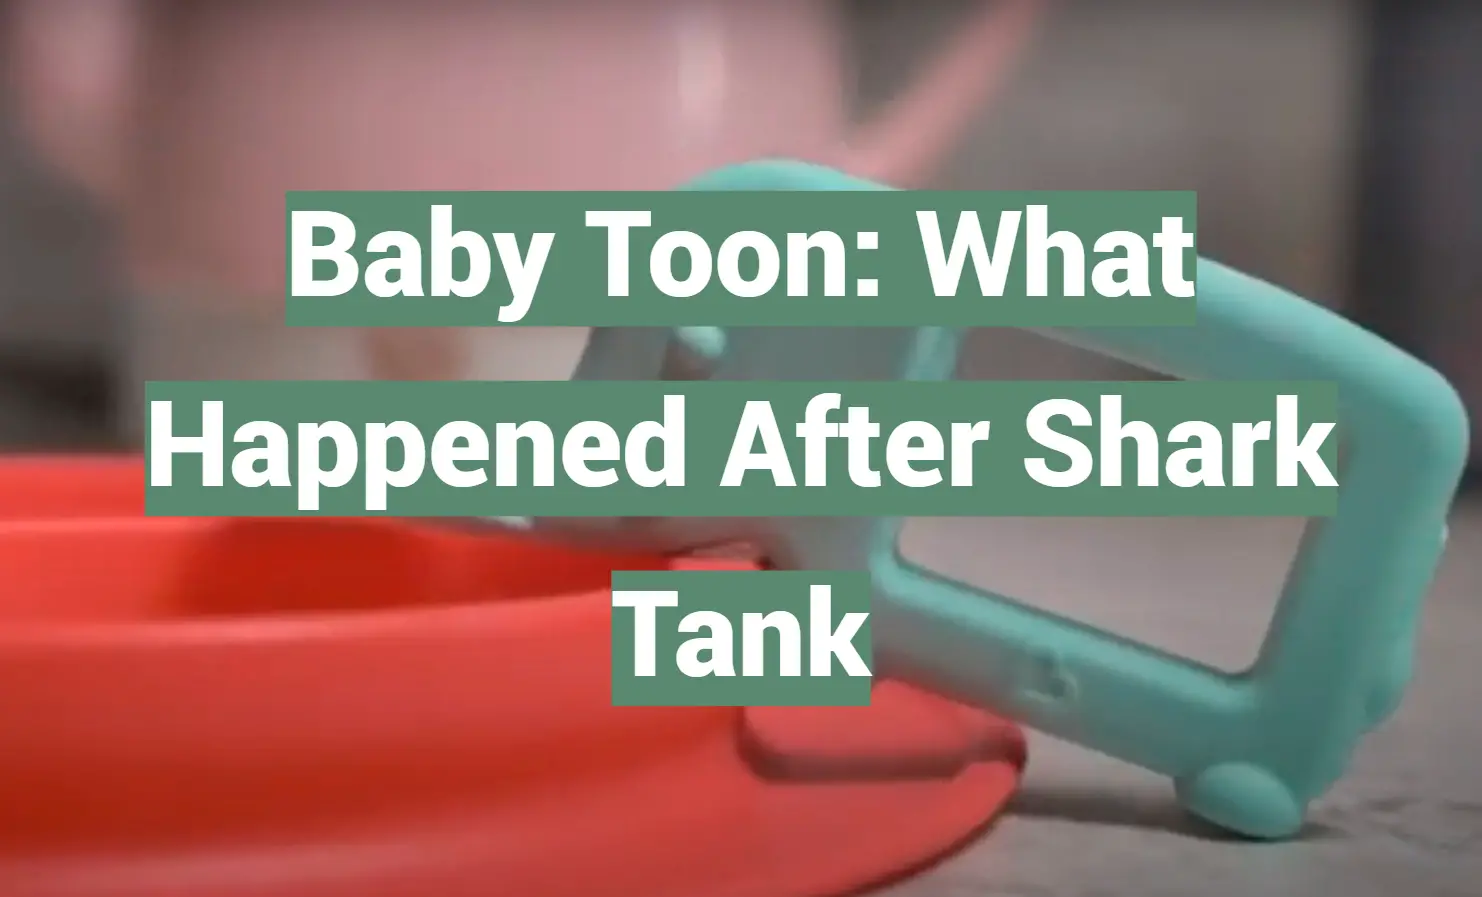 The Baby Toon on X: // The Baby Toon // Our spoon makes mealtimes